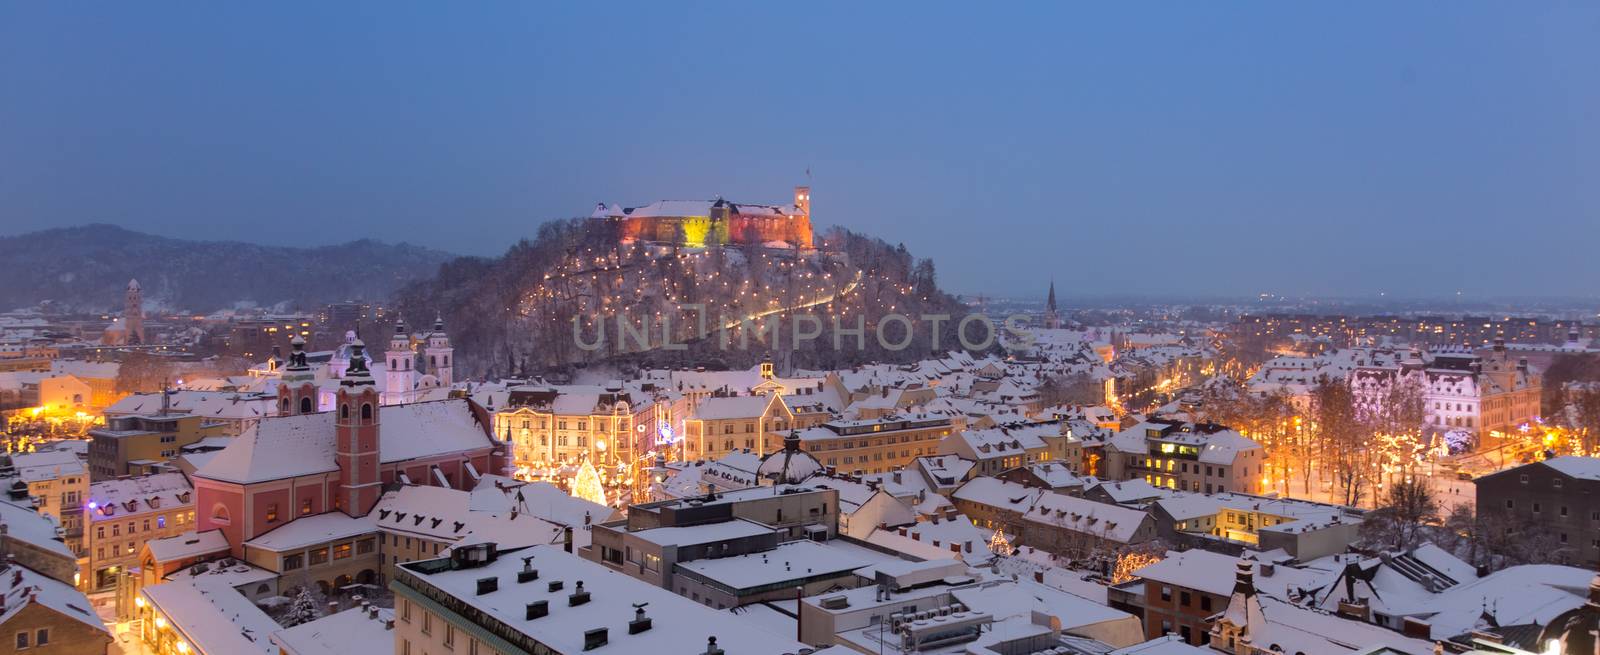 Aerial panoramic view of Ljubljana decorated for Christmas holidays. Roofs covered in snow in winter time. Slovenia, Europe.